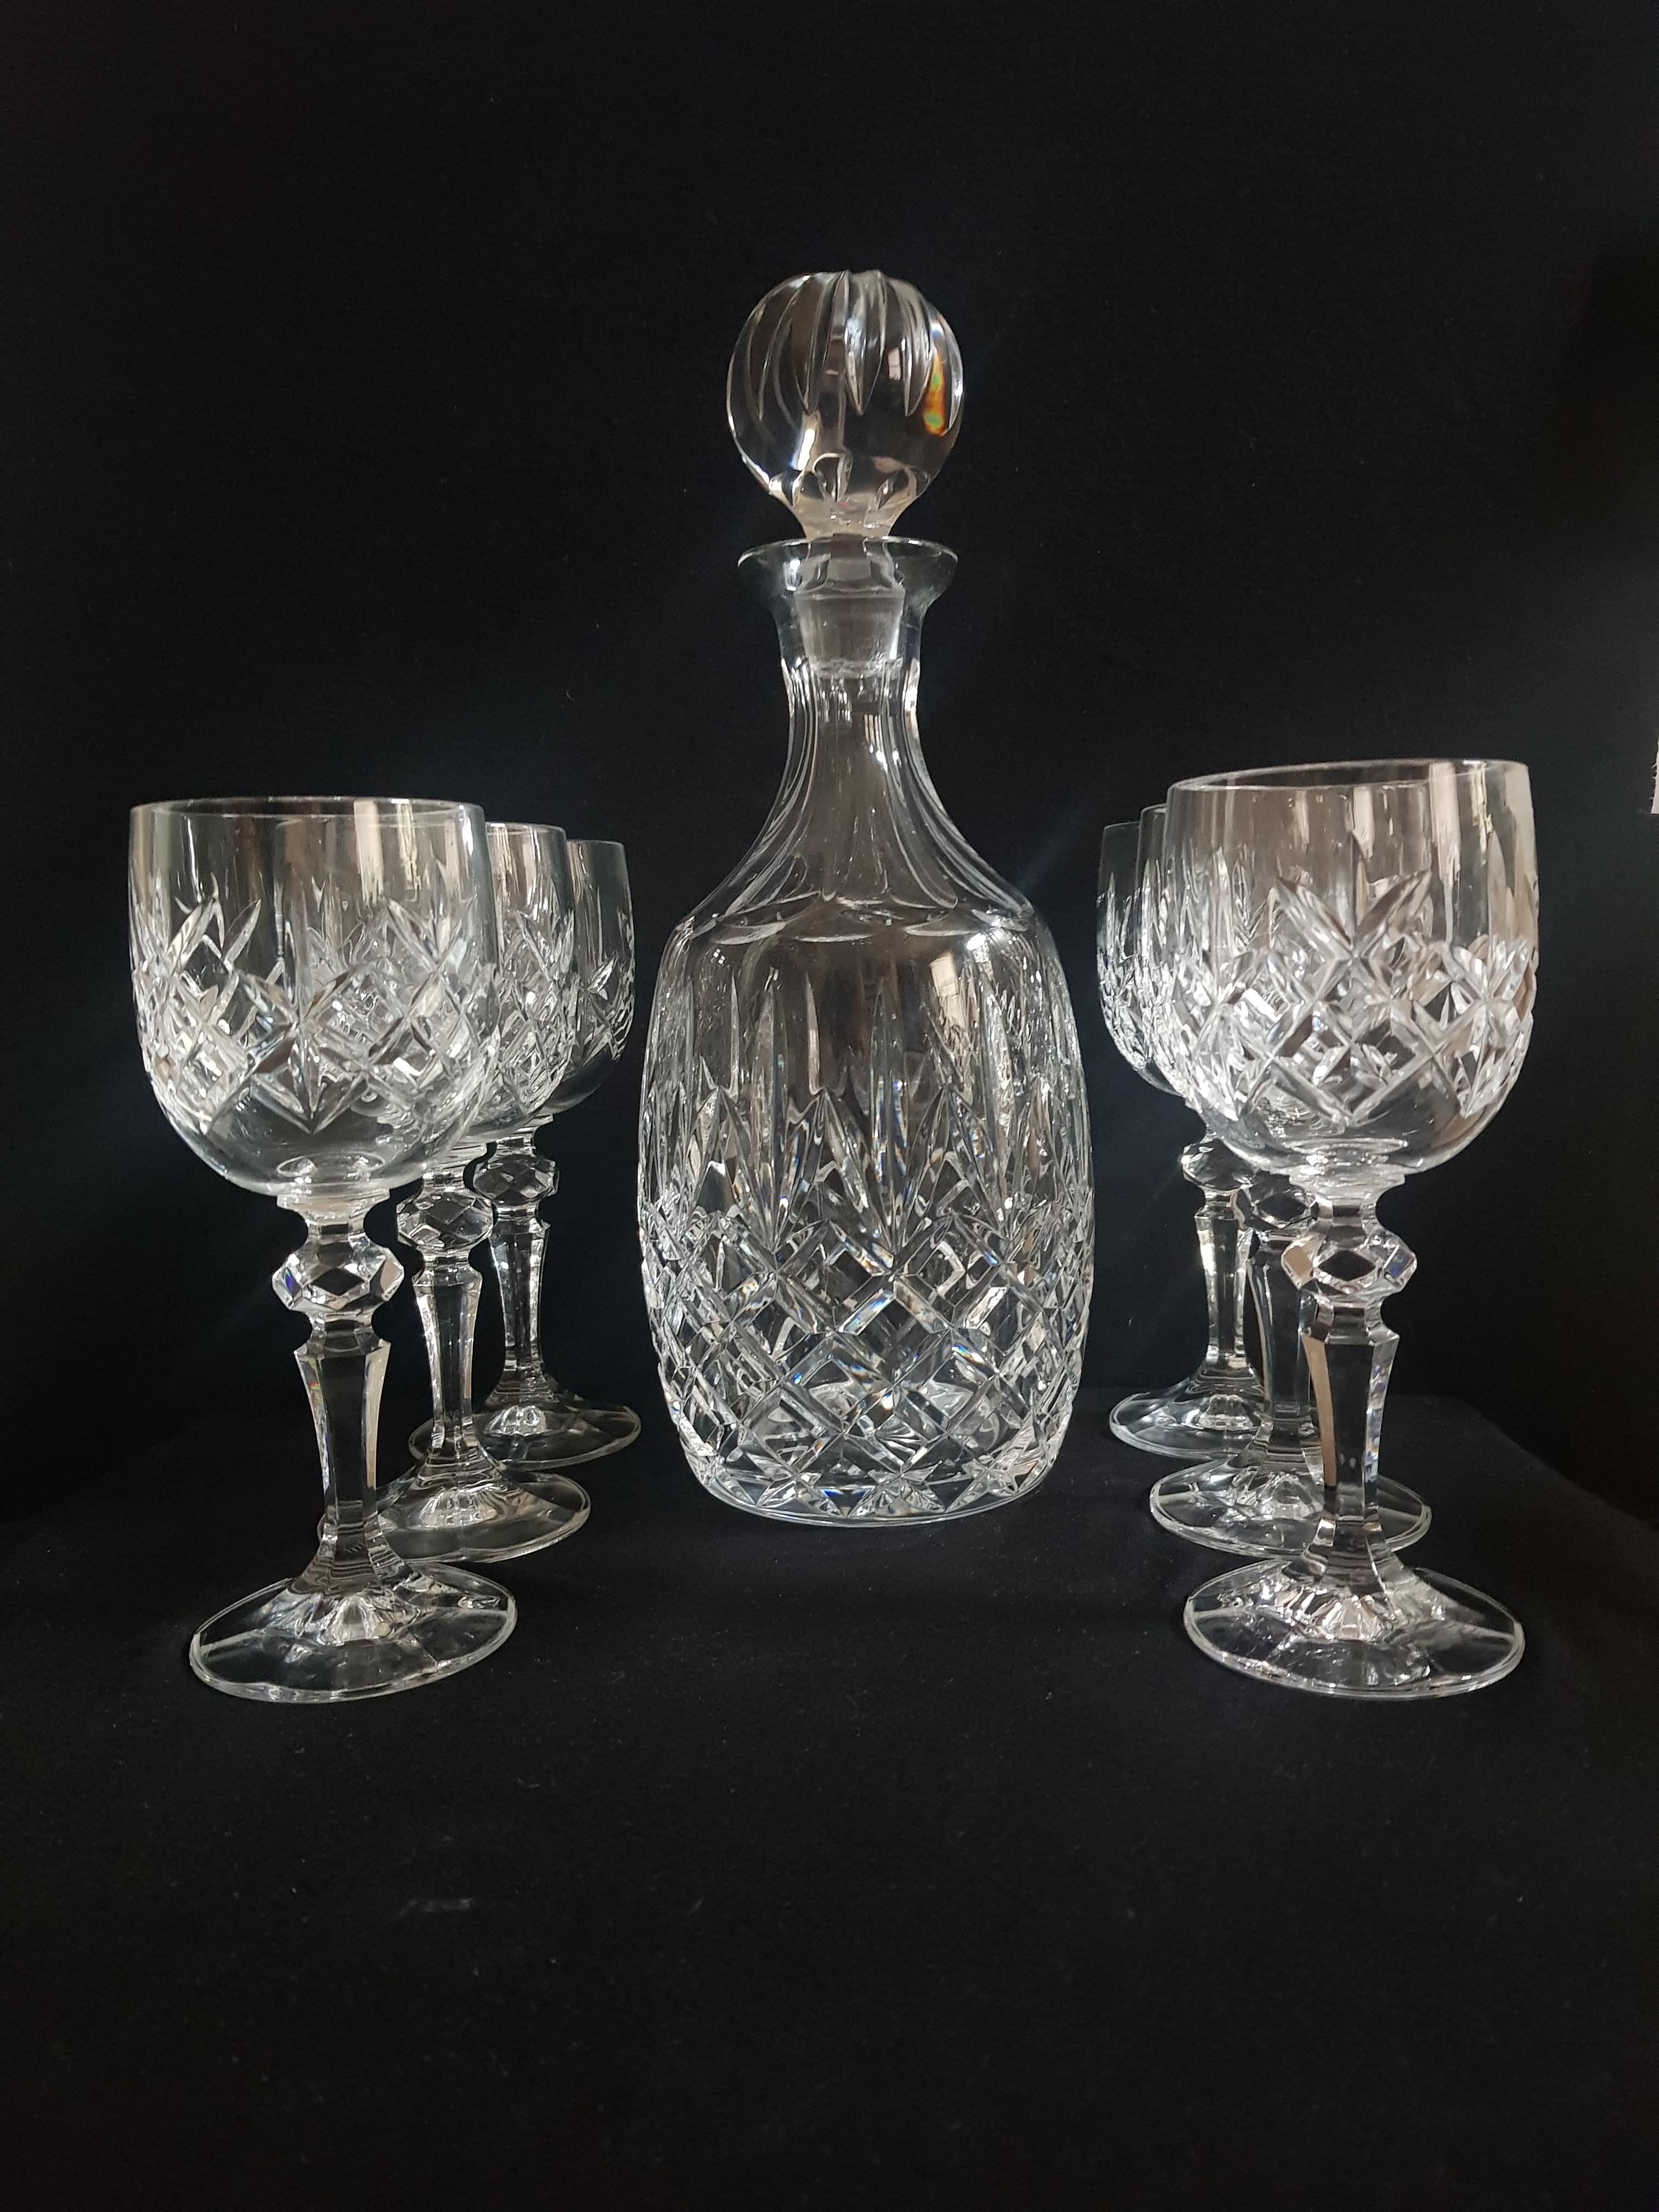 Beautiful vitange hand cut crystal vine set made in italy bottle with stoper 32 cm tall nd 6 glasses 18 cm tall brilliant cut perfect condition.